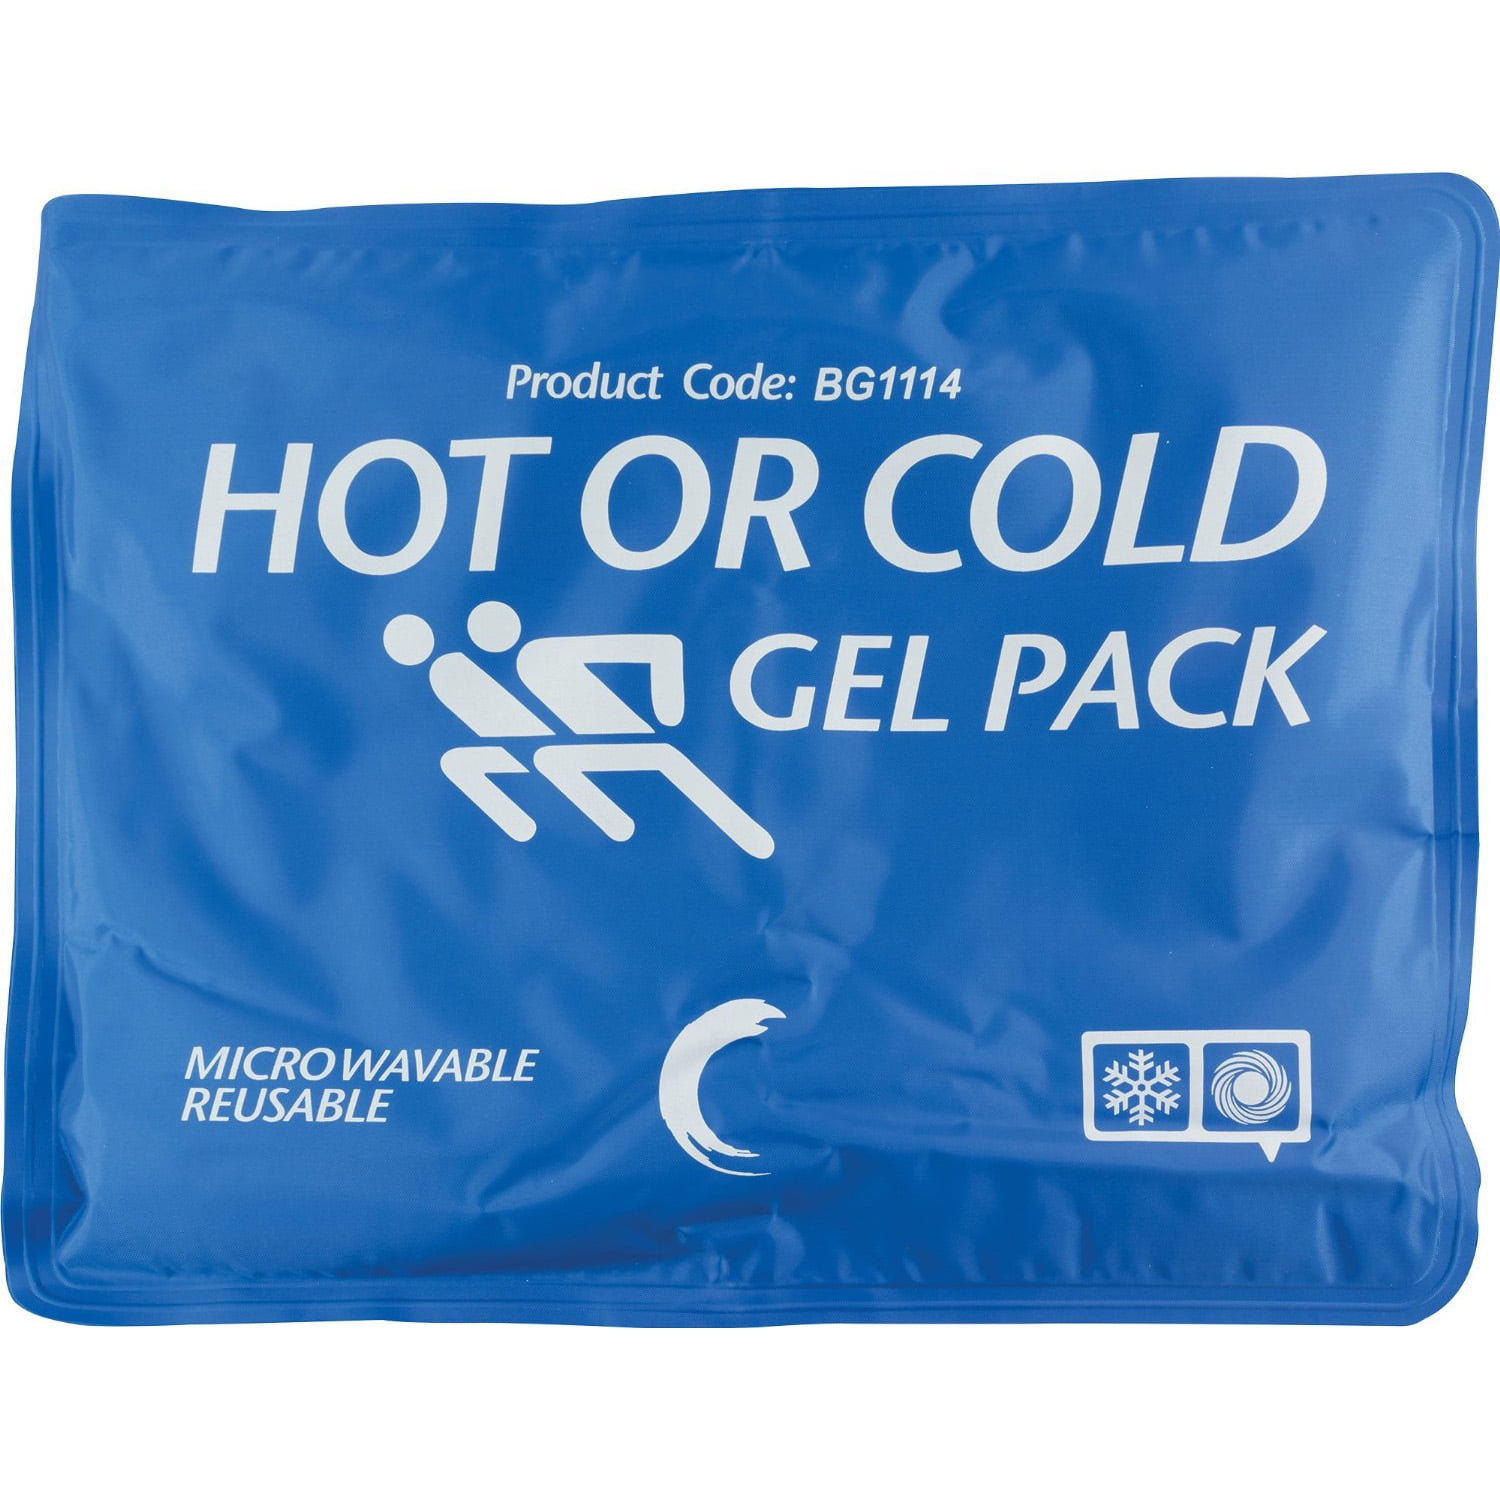 Dry Gel ICE PACKS Reusable Use Camping Cold Pain Relief Fast Individuals 